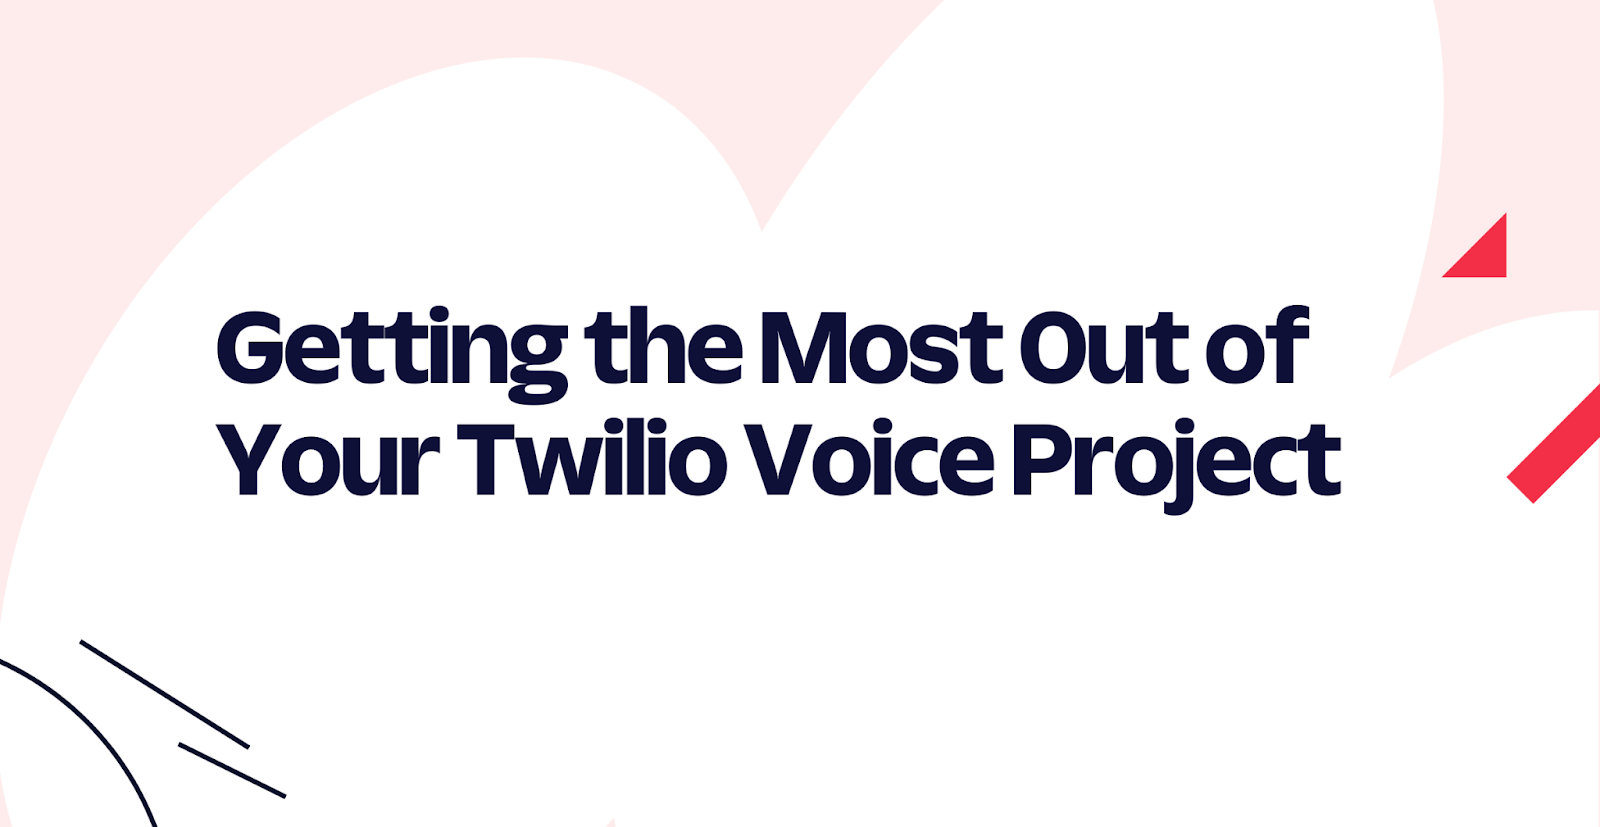 Getting the Most Out of Your Twilio Voice Project